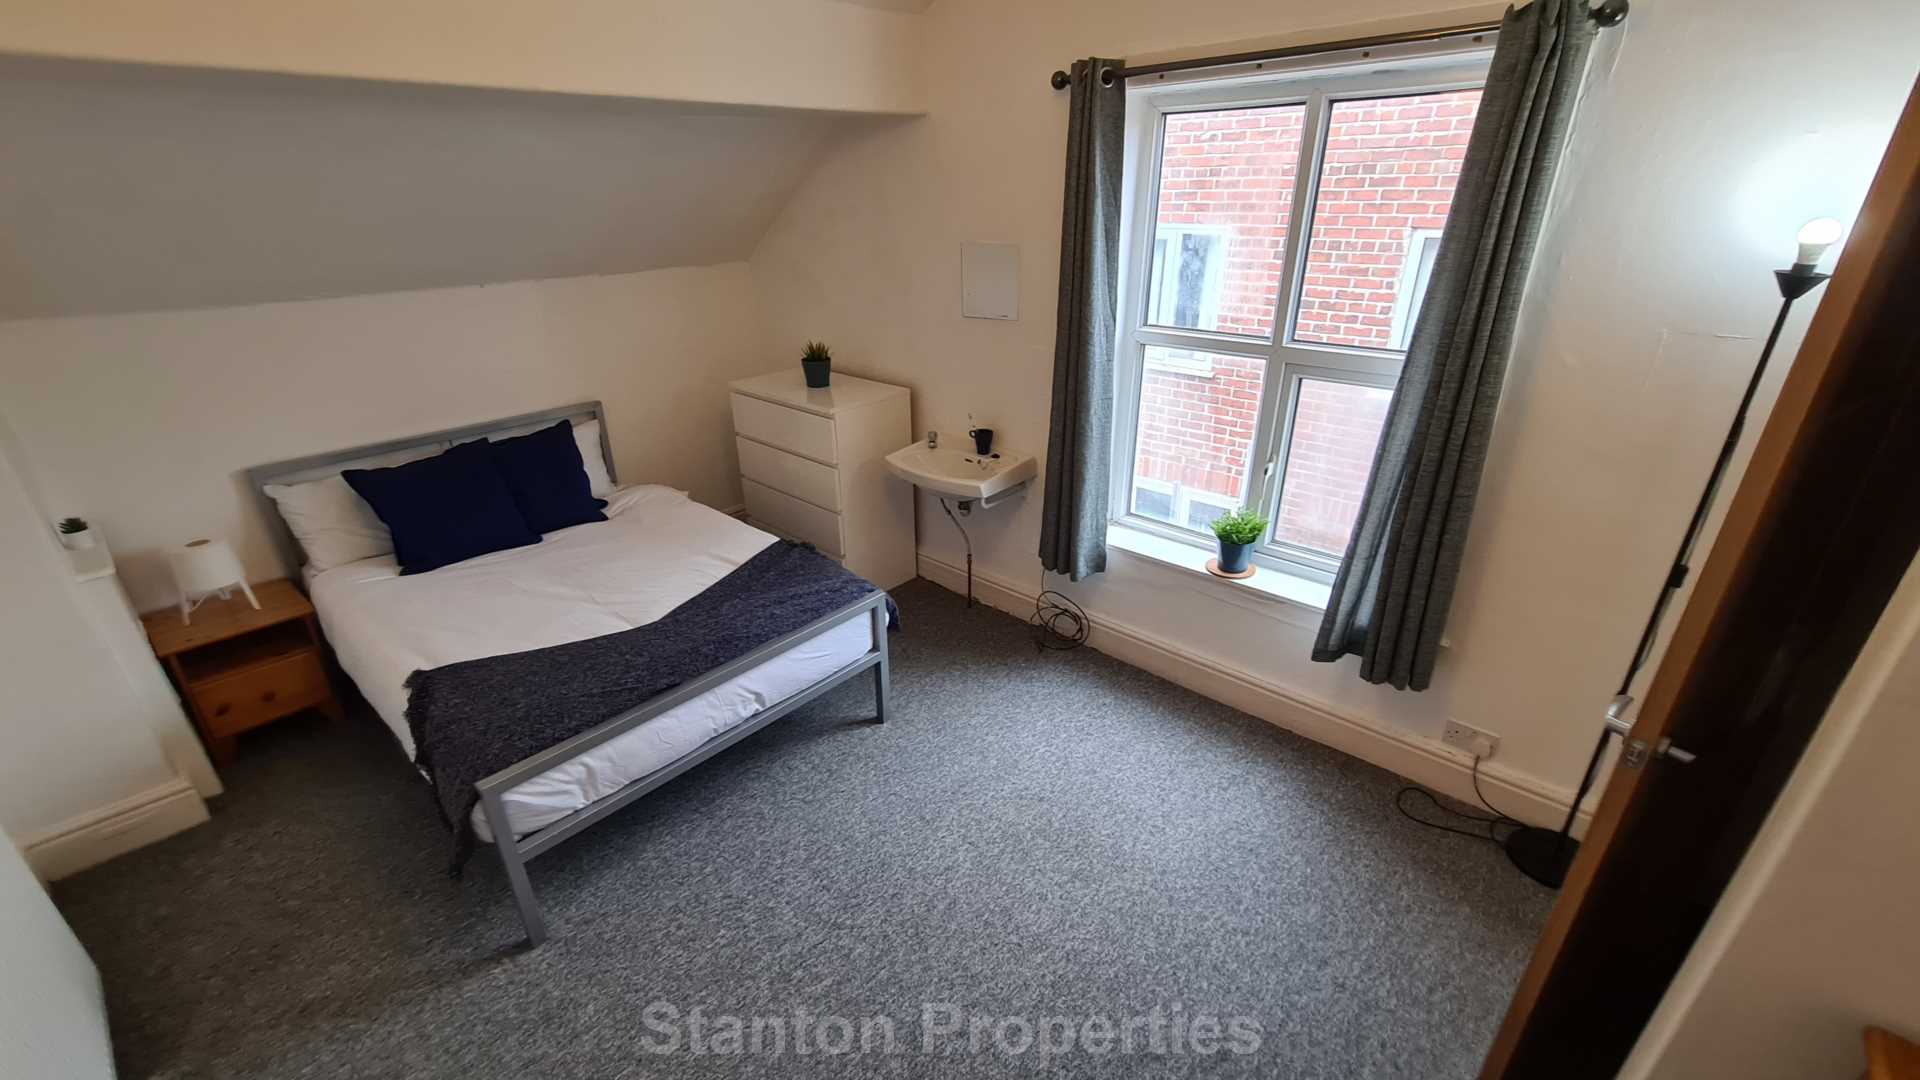 £145 pppw, See Video Tour, Wellington Road, Fallowfield, Image 29